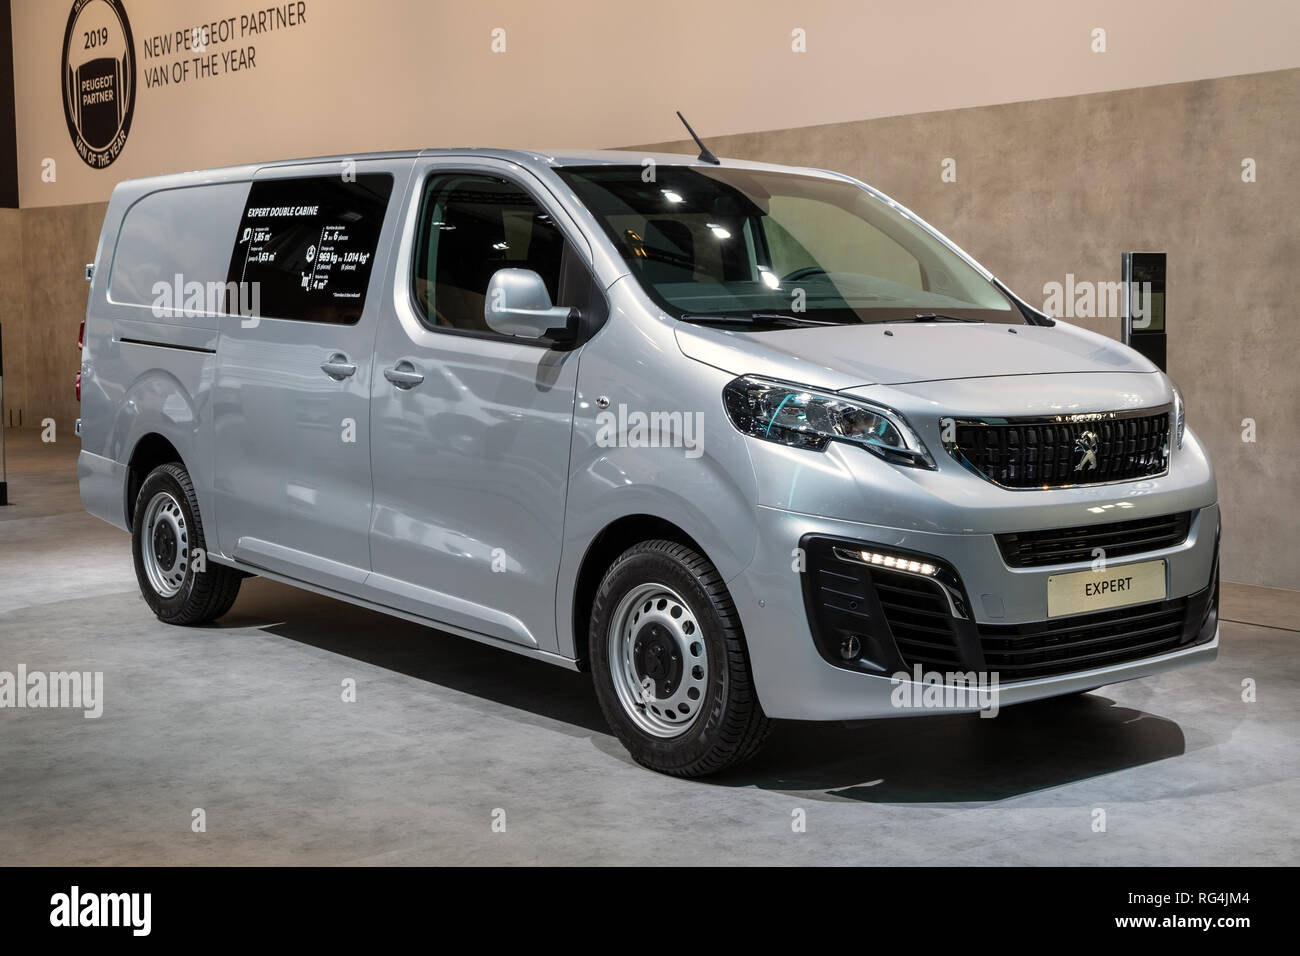 Peugeot Expert High Resolution Stock Photography and Images - Alamy